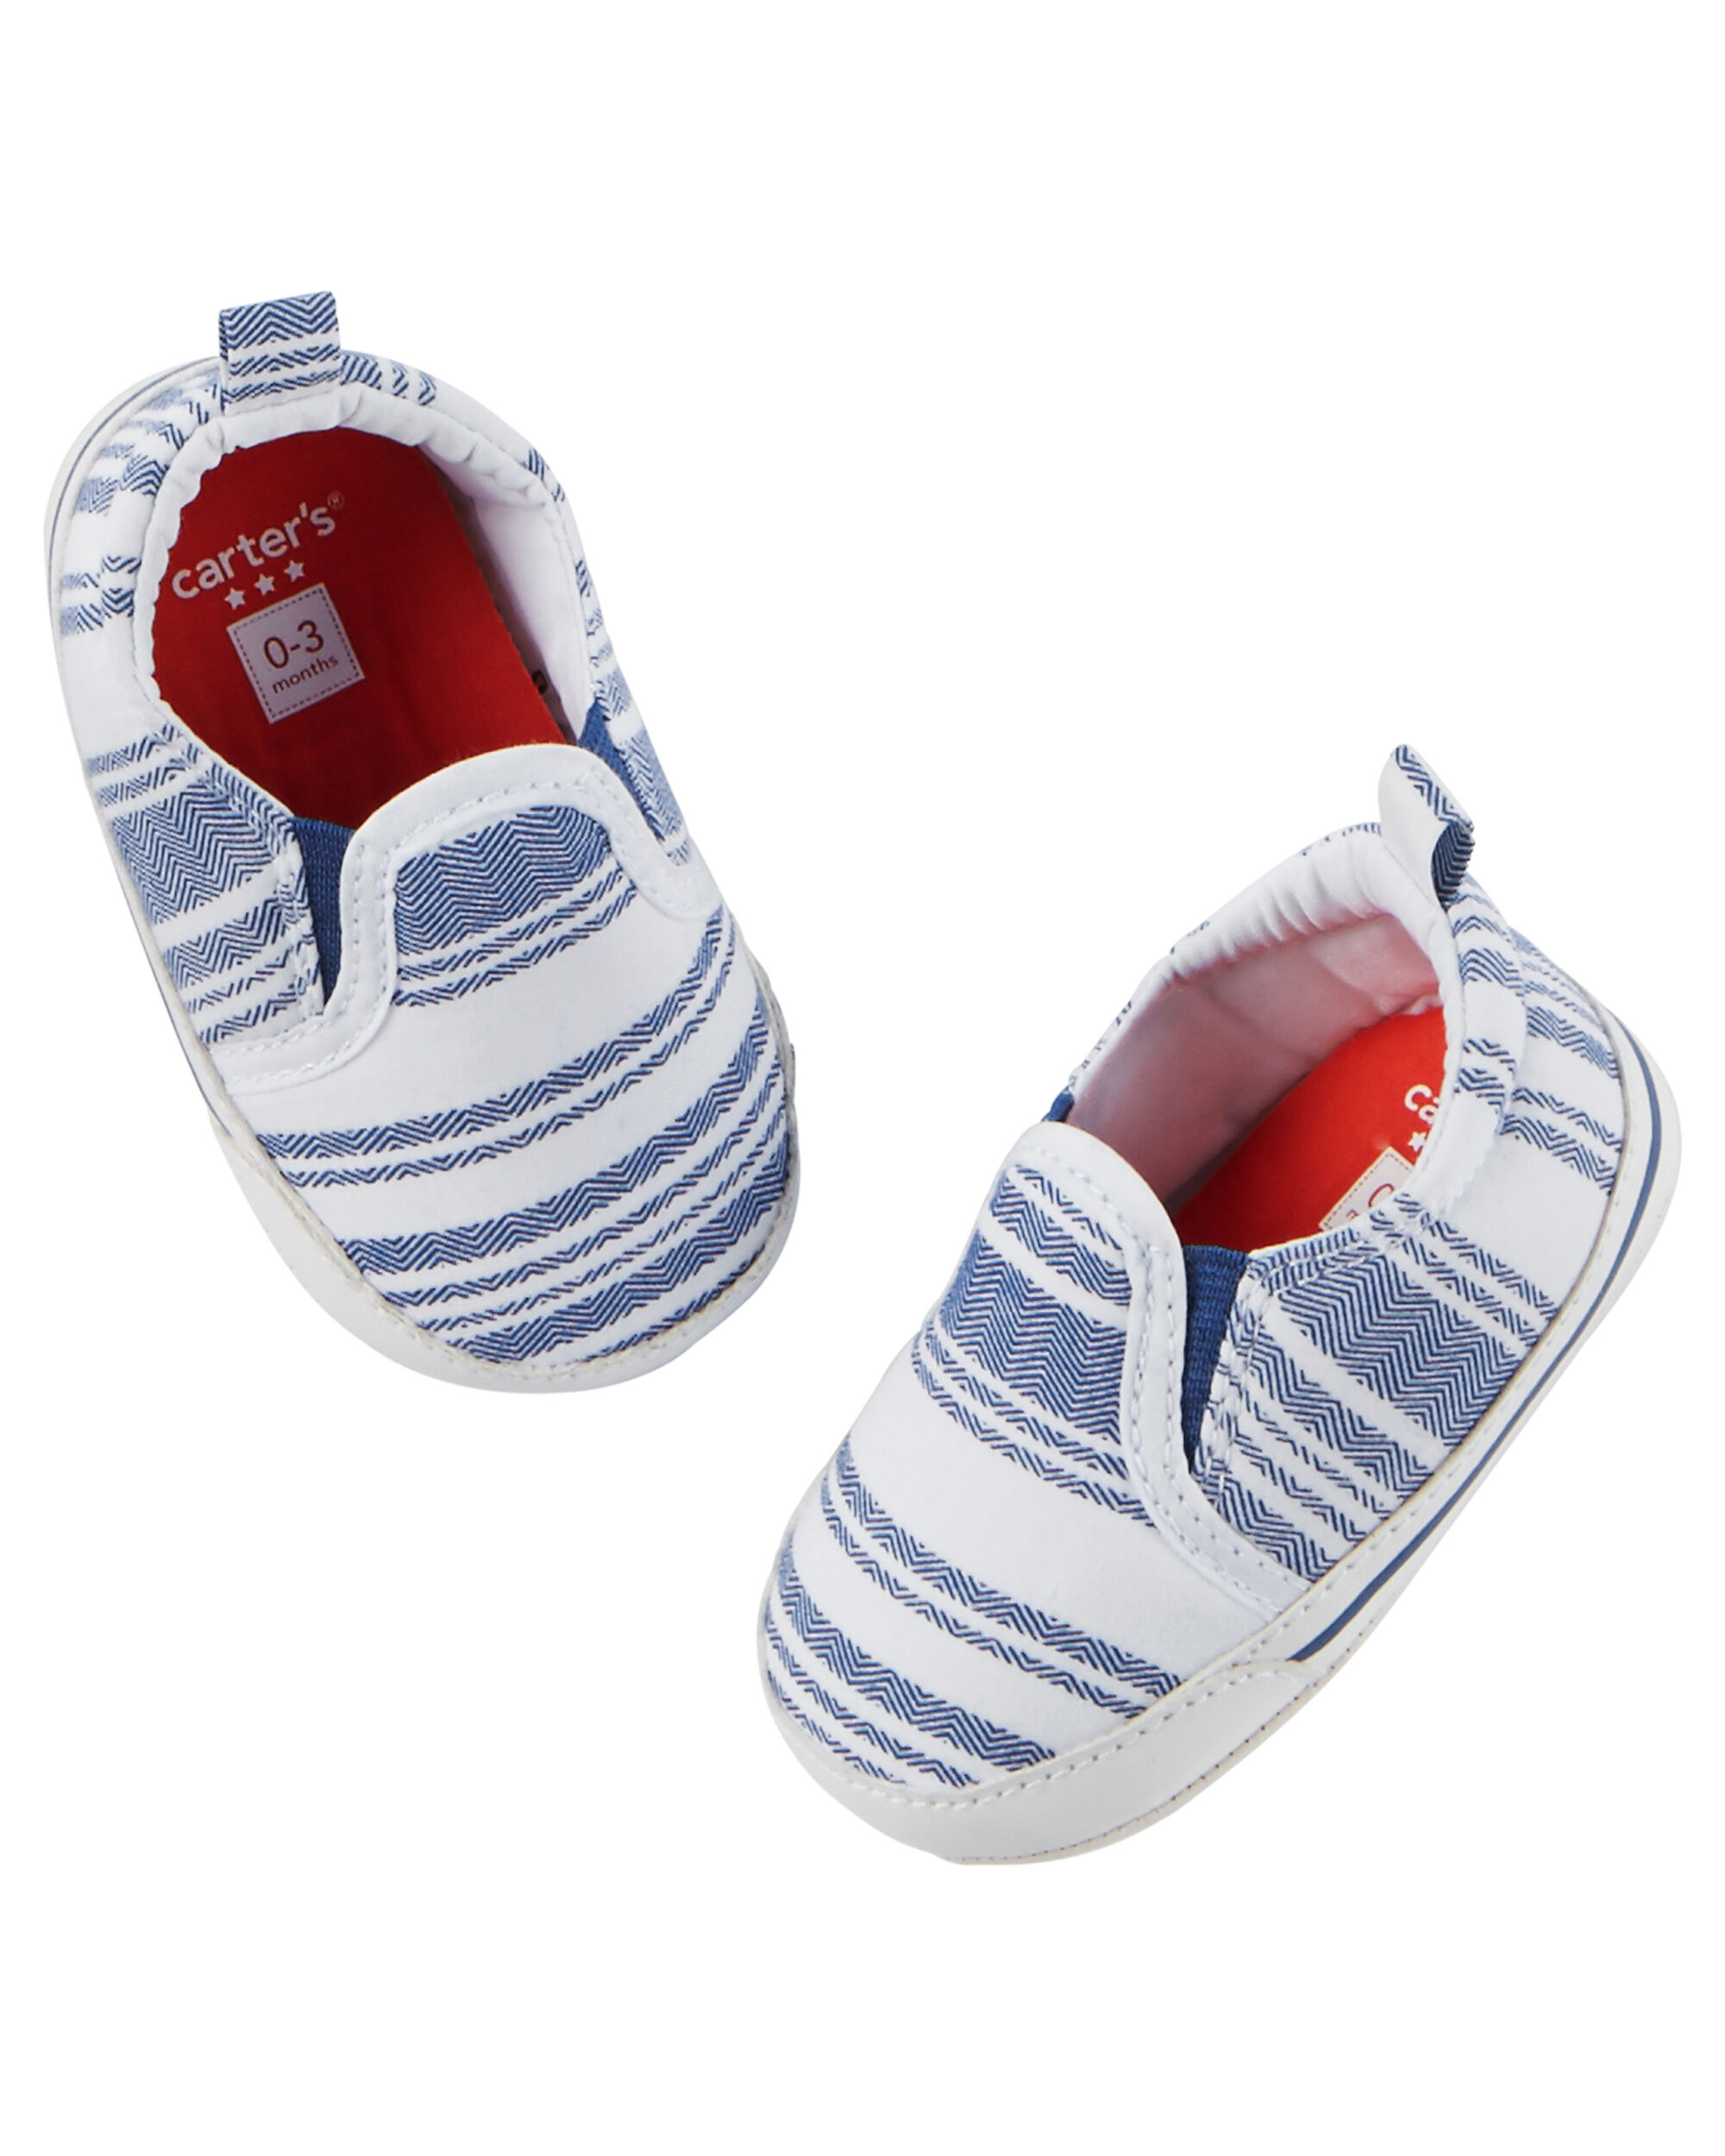 carters crib shoes